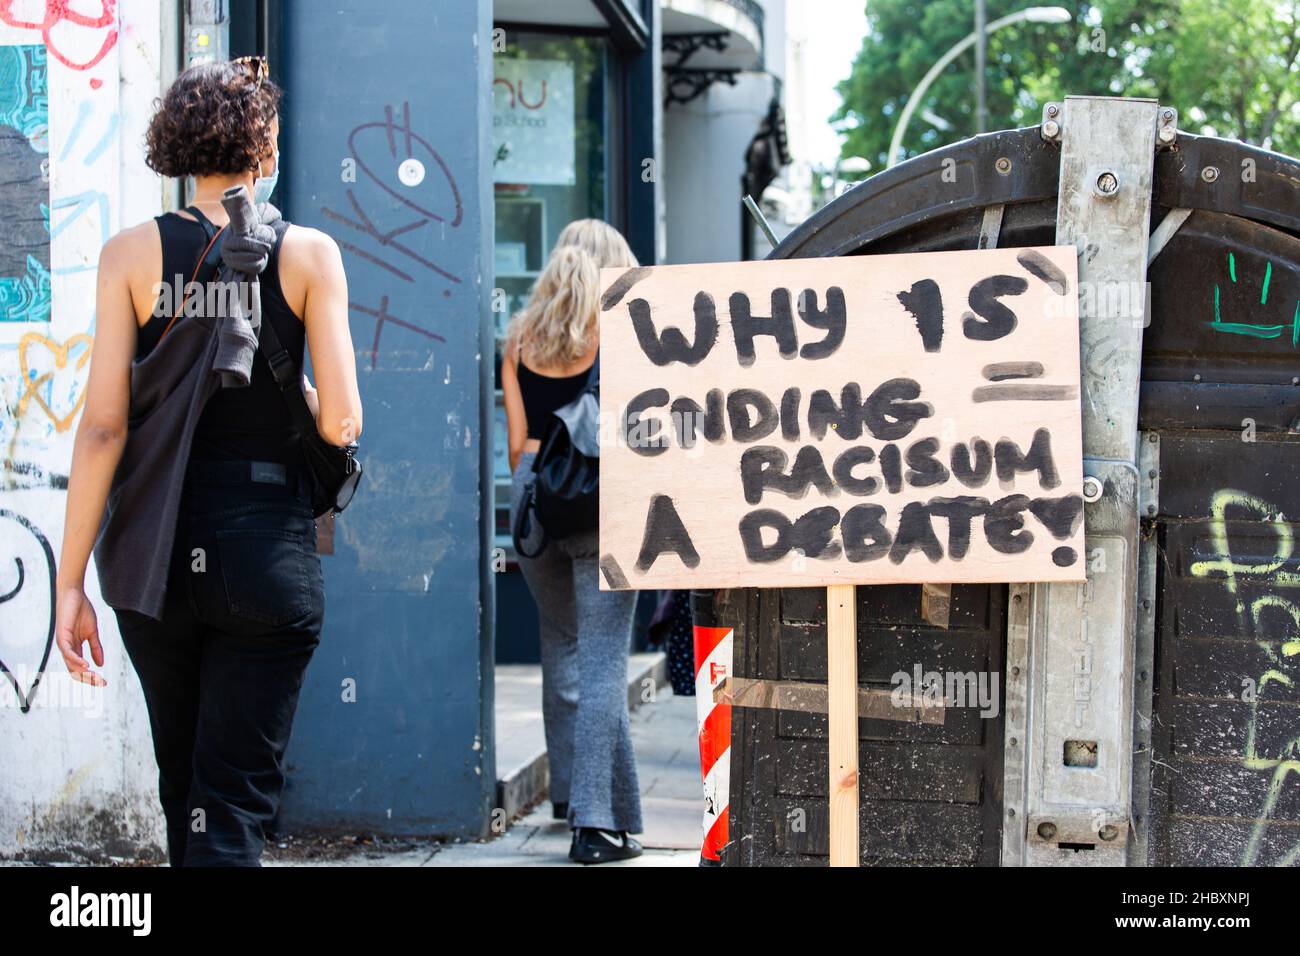 why s ending racism a debate placard in Brighton 2020 Stock Photo